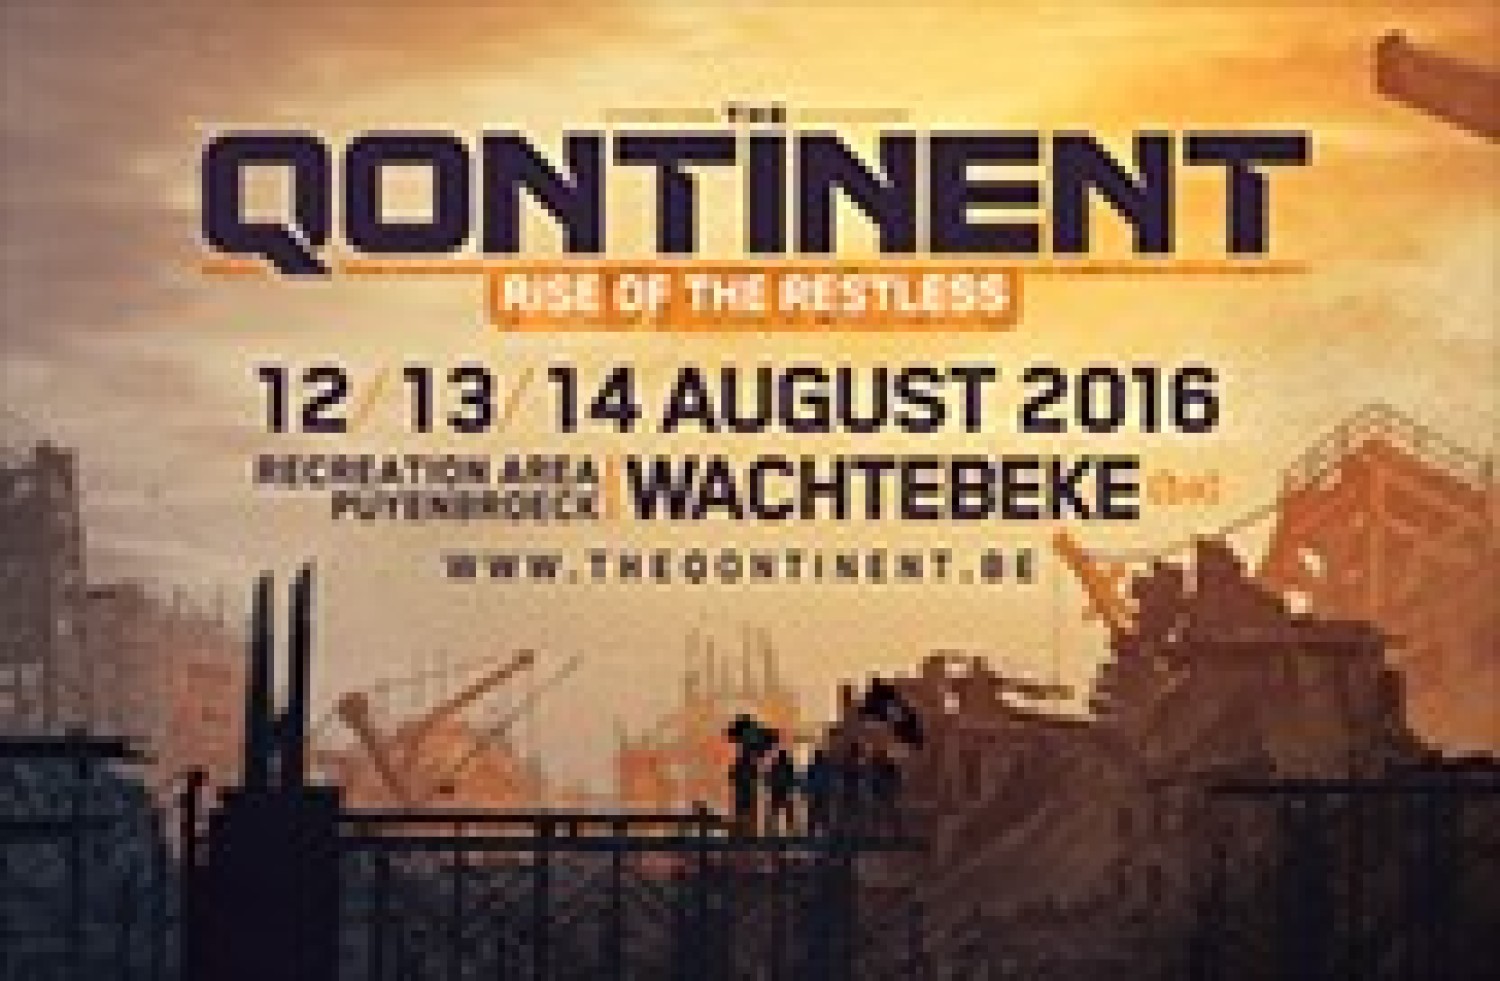 Party report: The Qontinent, Wachtebeke (BE) (14-08-2016)